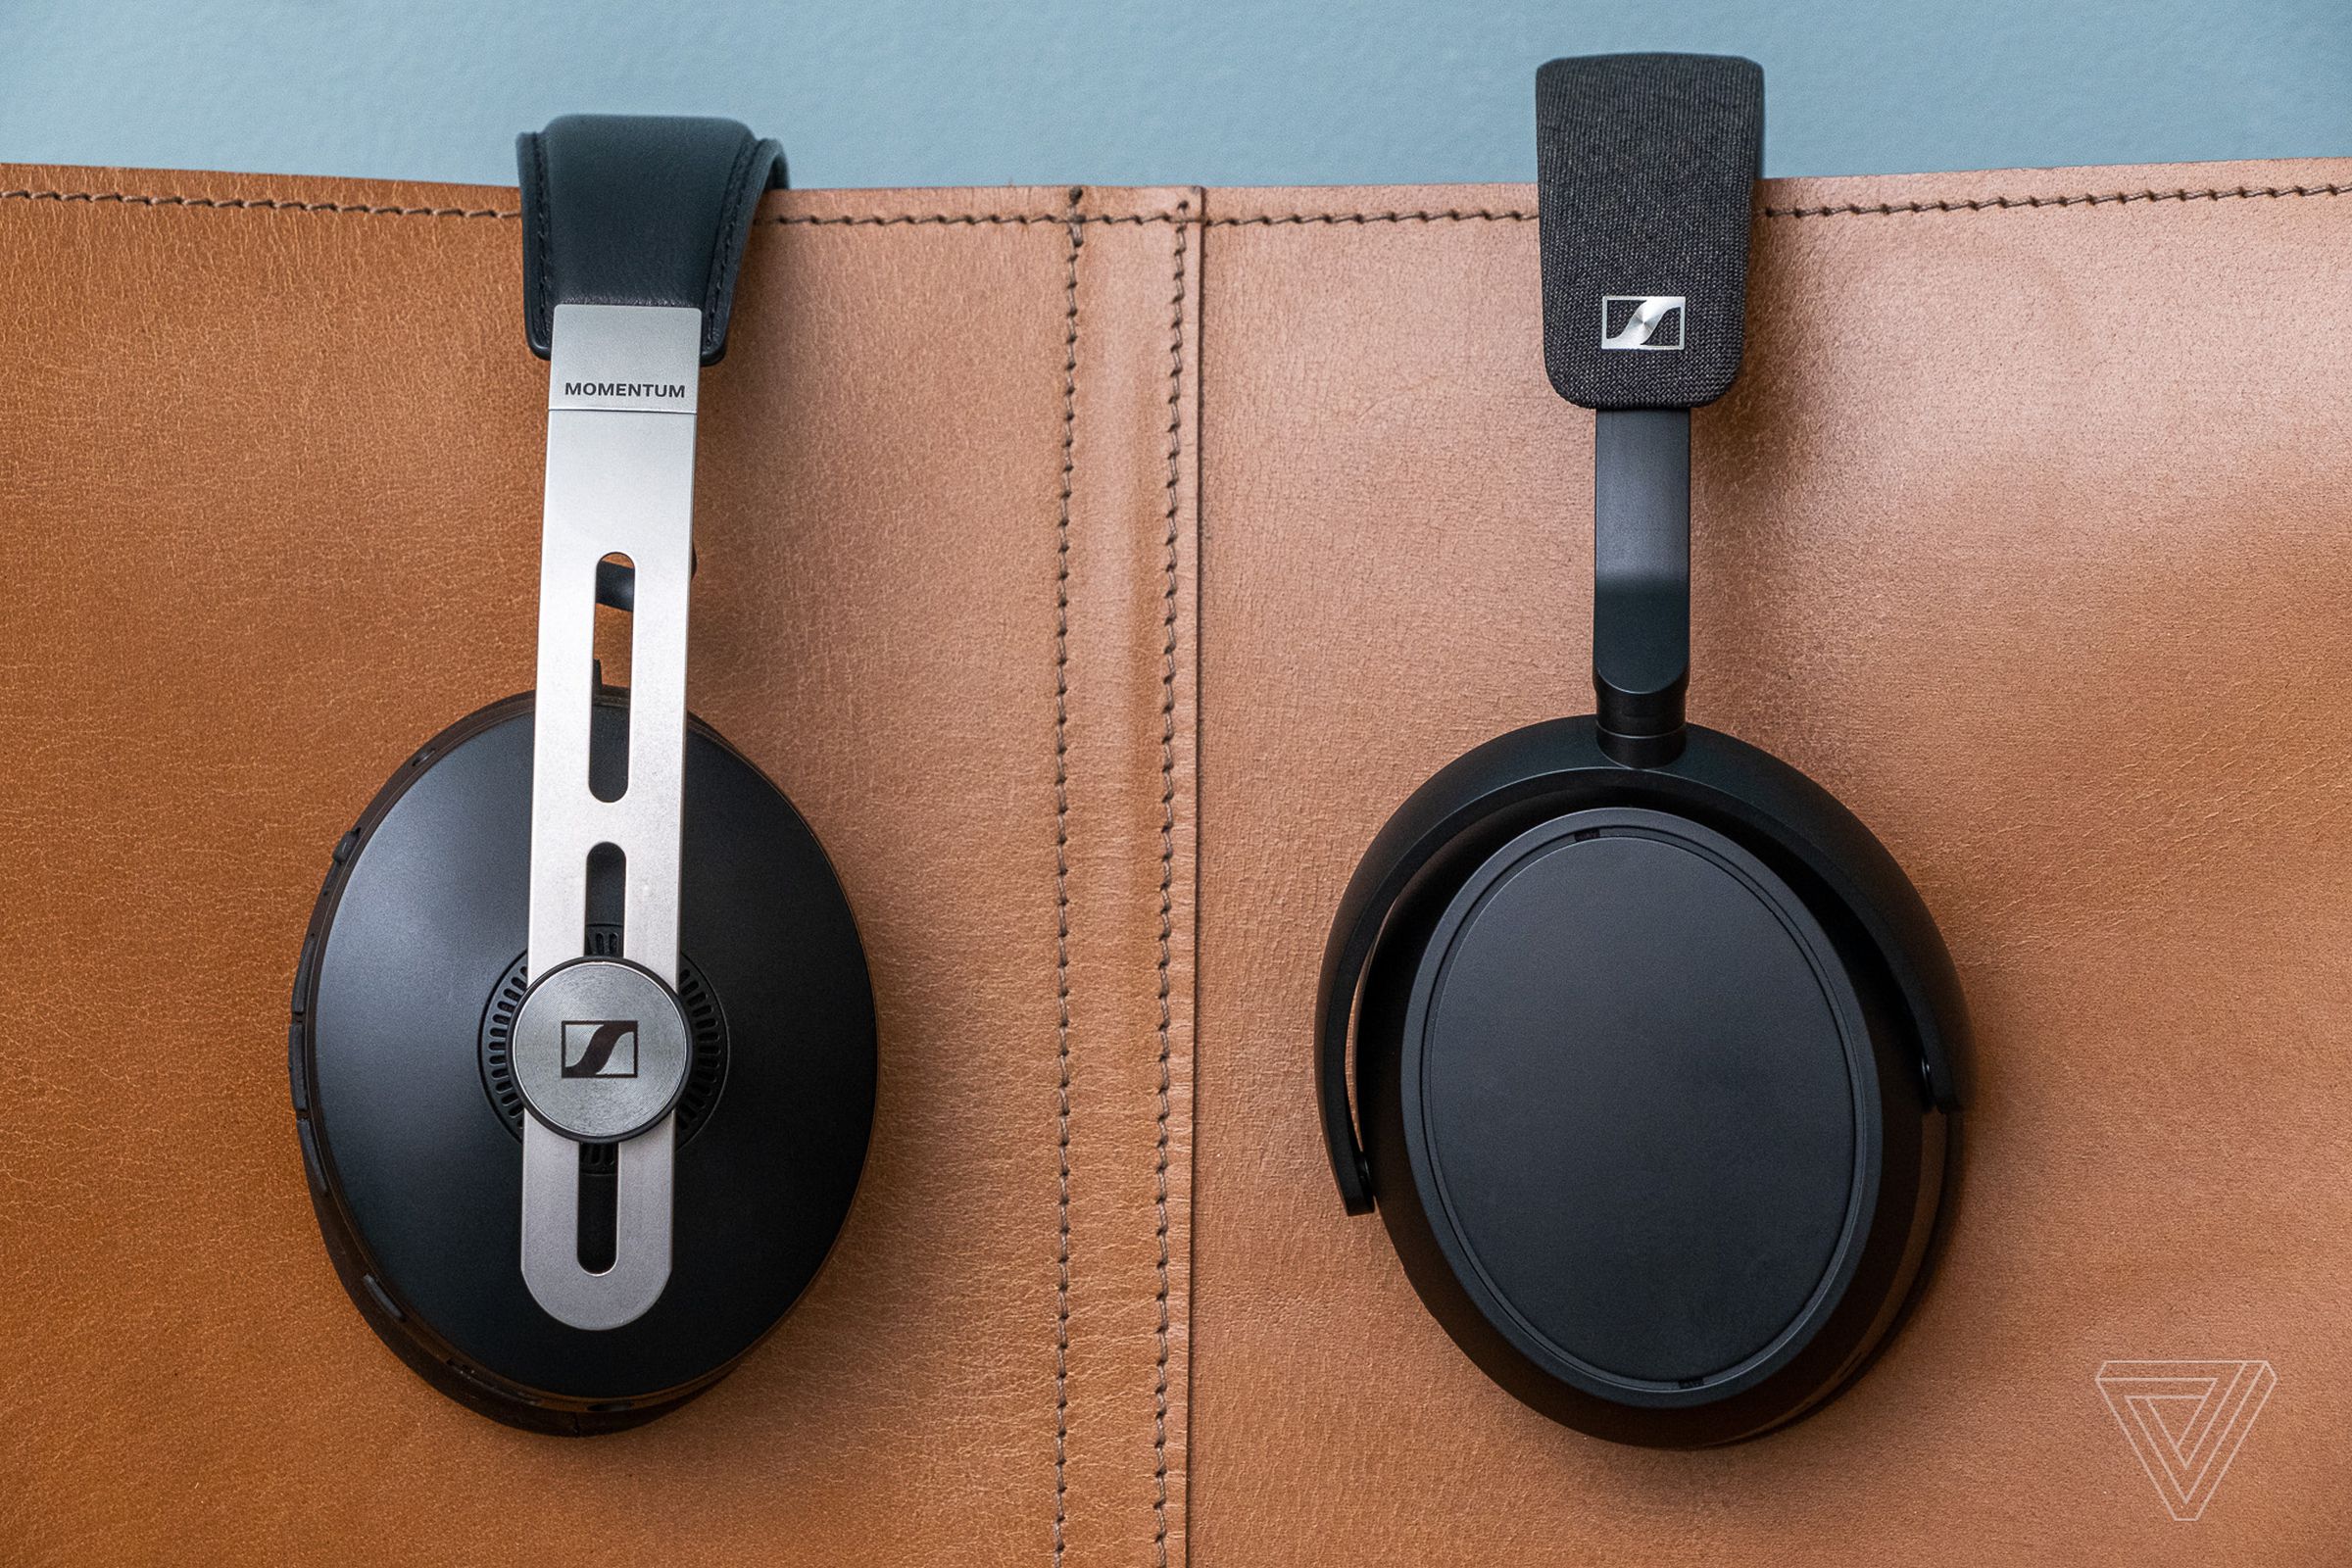 It’s not often you see this big of a design change from one headphone generation to the next.